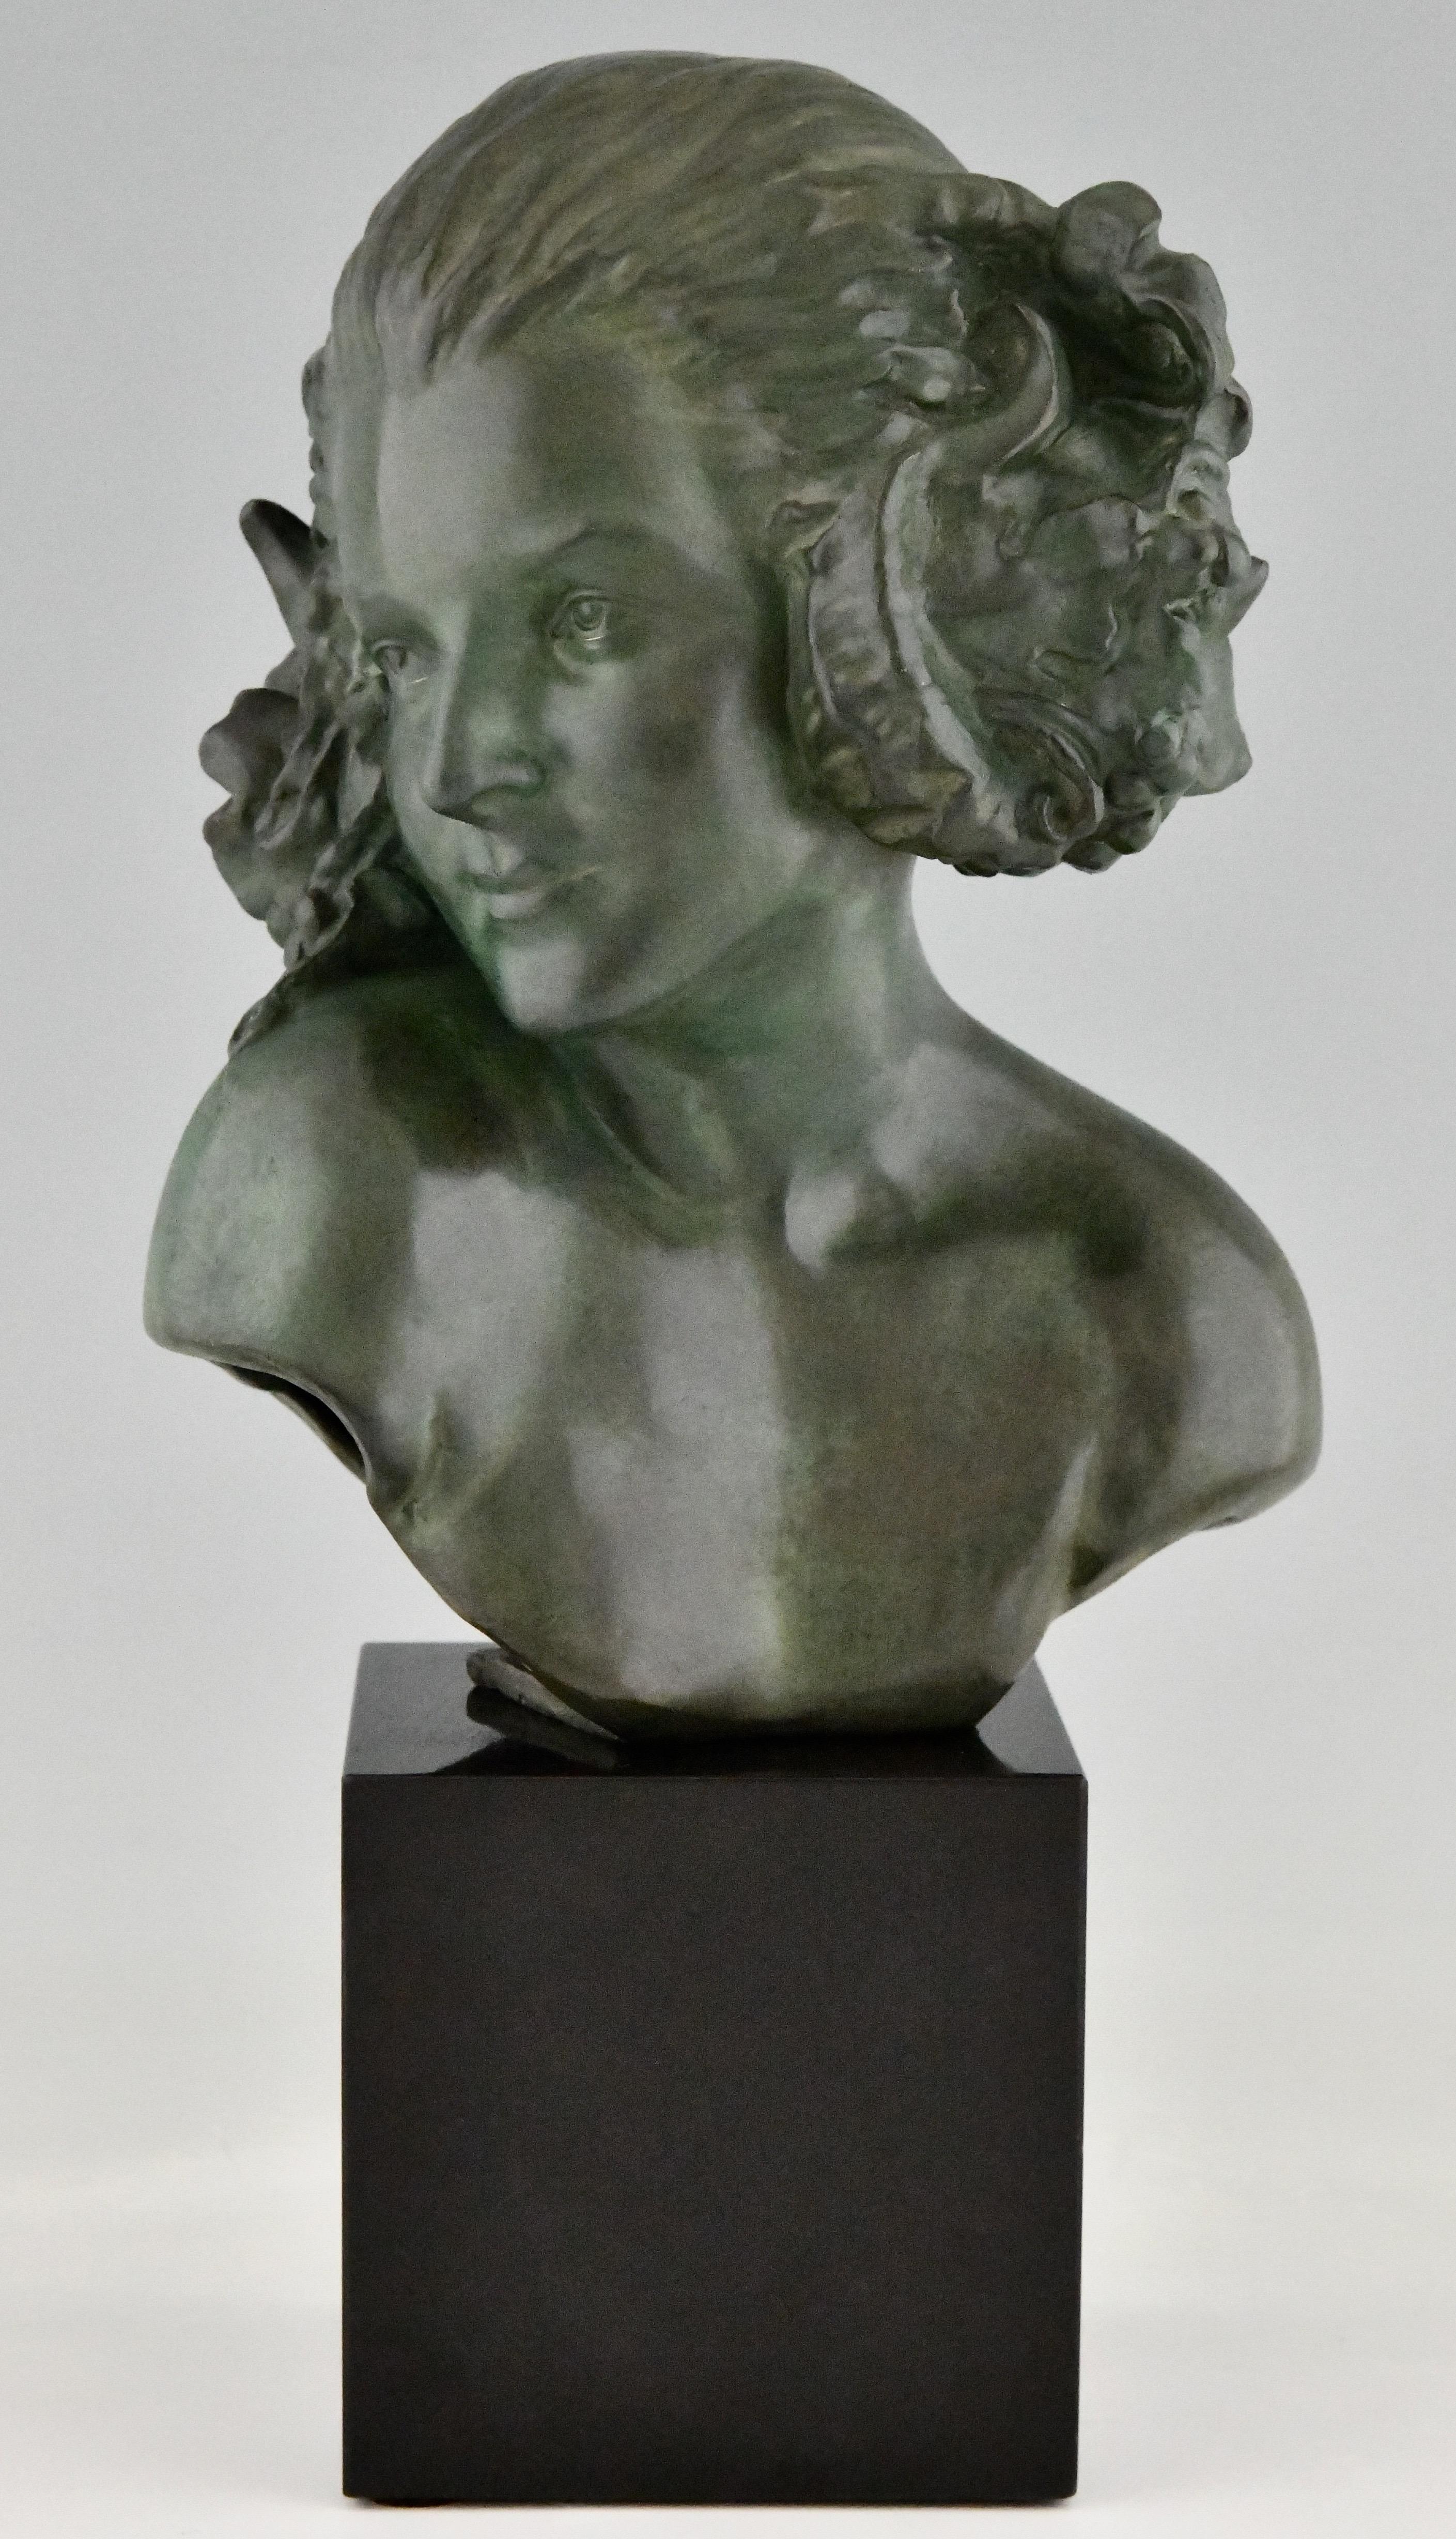 Art Deco bronze bust of a female satyr by Maxime Real del Sarte. Bronze with dark lovely green patina on a Belgian Black marble base, France 1921.

This sculpture has been rewarded Grand Prix National des beaux Arts in 1921 
Literature:
Bronzes,